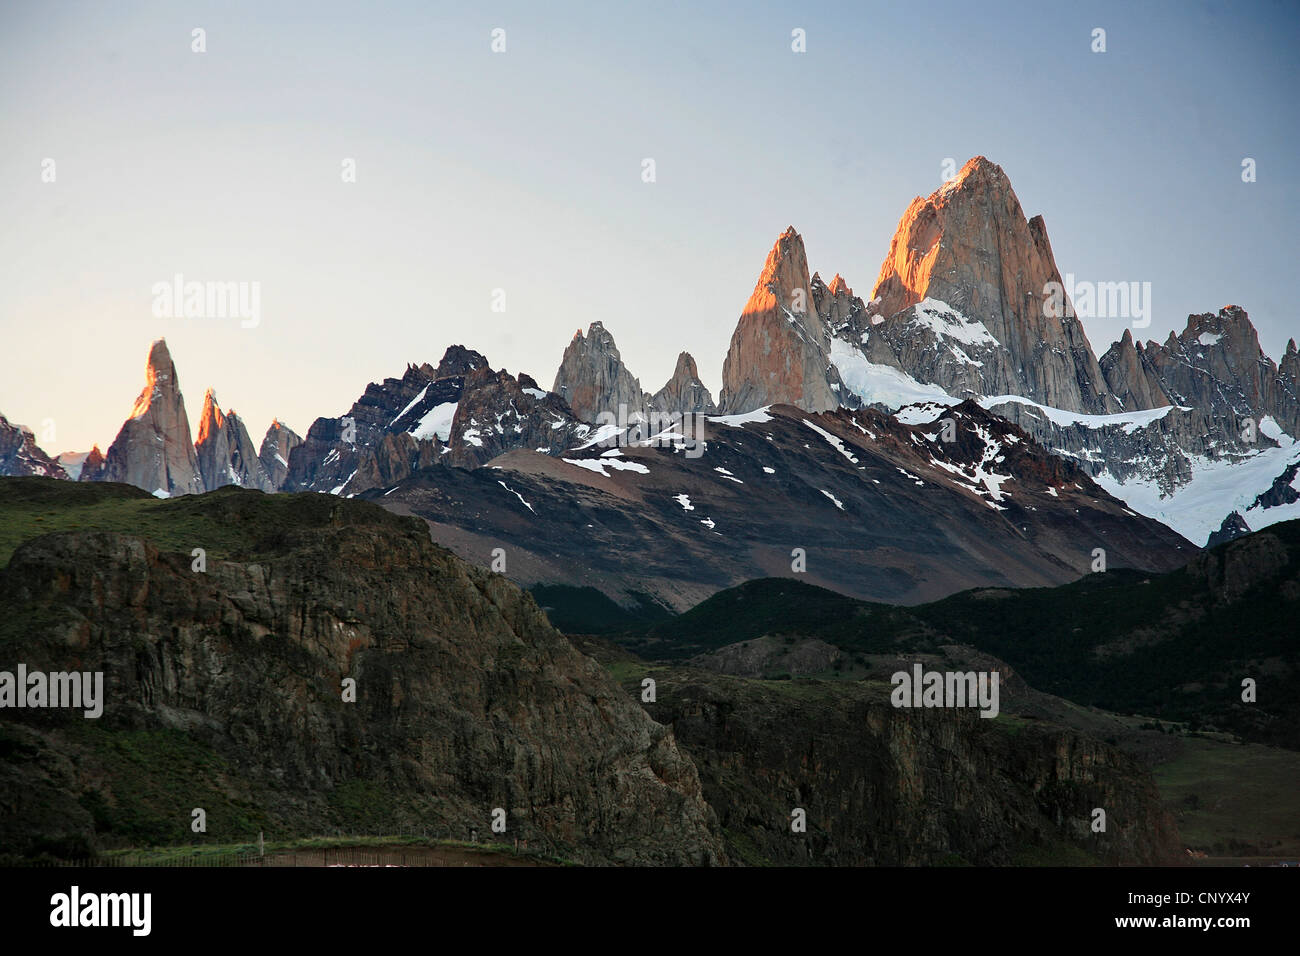 Monte Fitz Roy at sunset, Argentina, Los Glaciares National Park Stock Photo